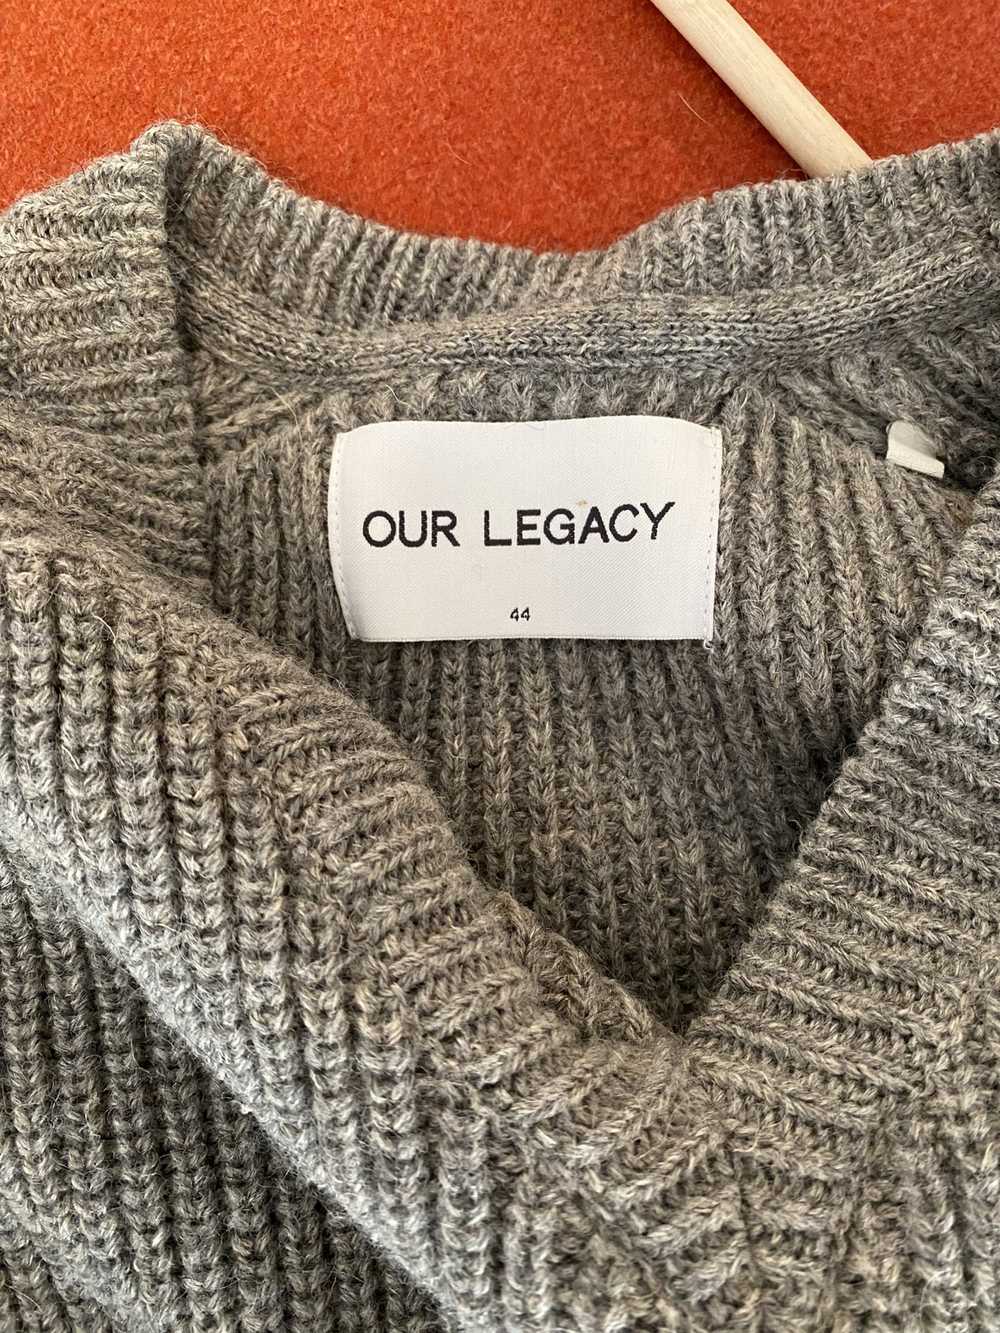 Our Legacy Oour Legacy Wool Raglan V Neck Sweater - image 3